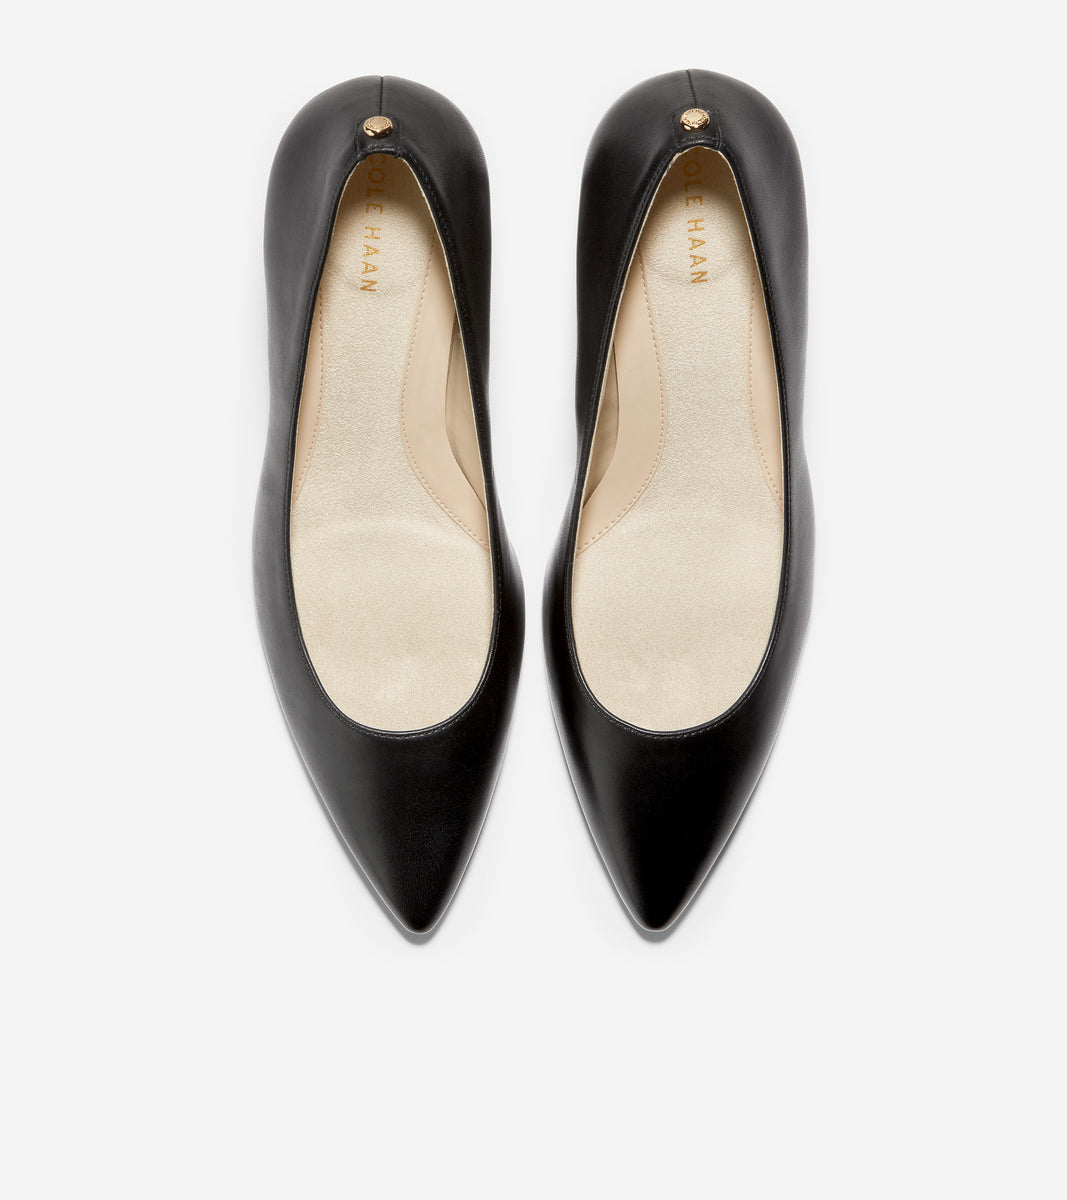 ColeHaan-The Go-To Stiletto Pump-w18173-Black Leather